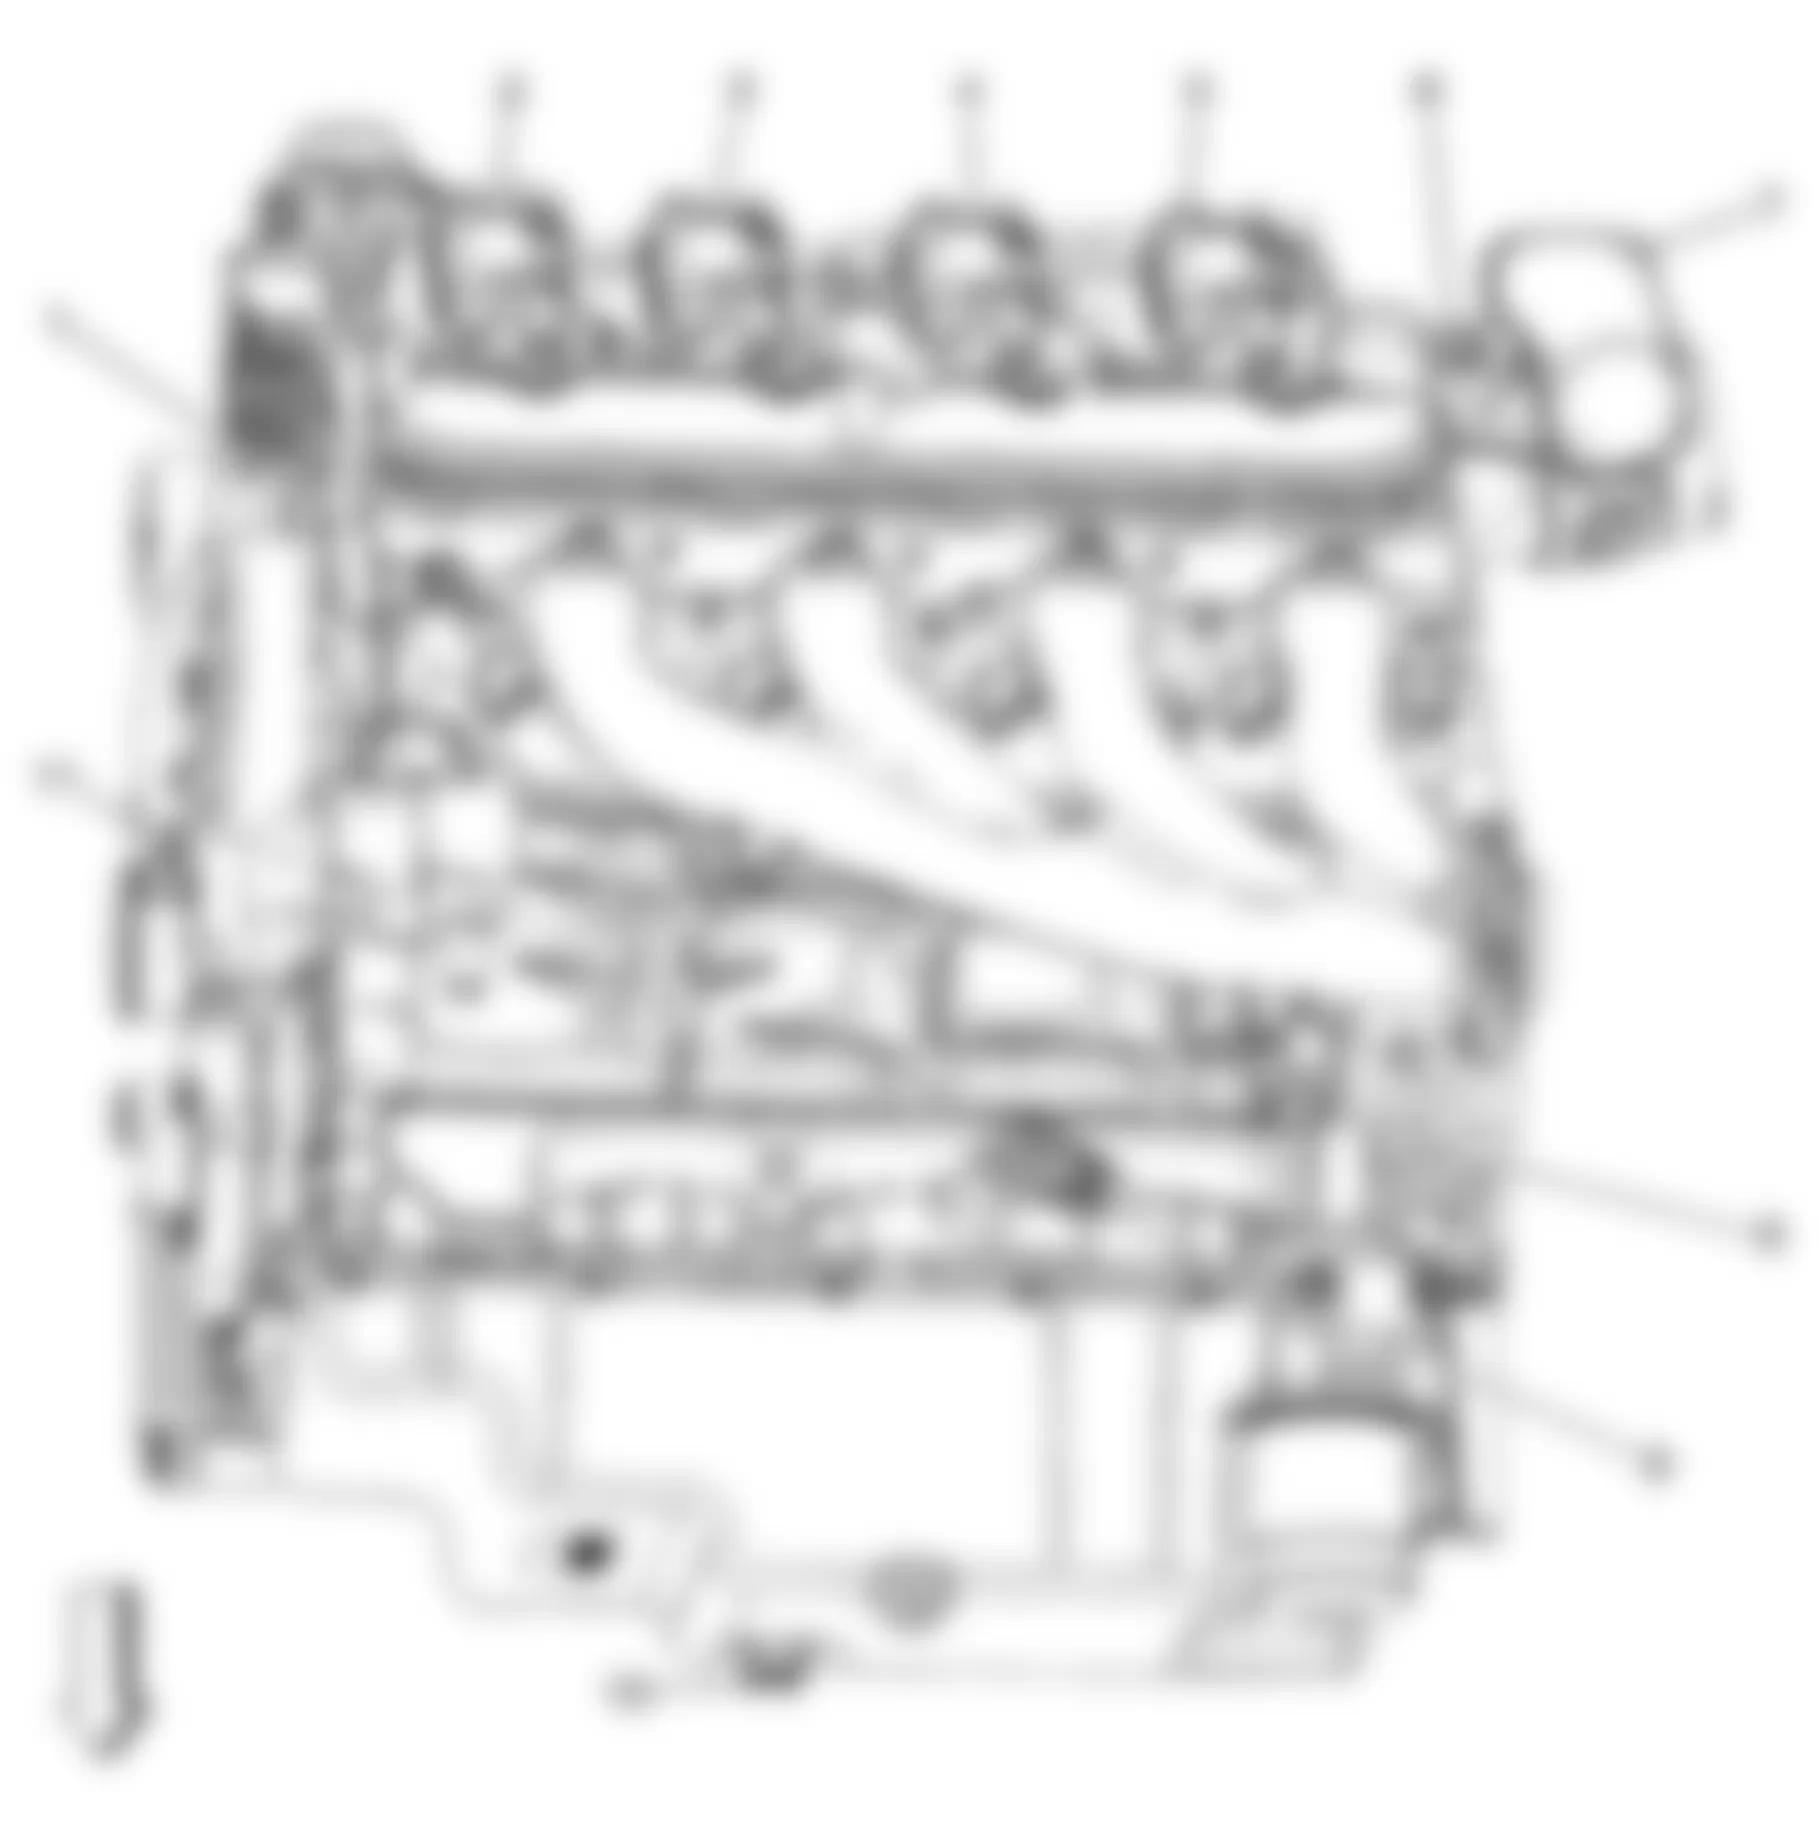 Buick Allure CXL 2008 - Component Locations -  Left Side Of Engine (5.3L)